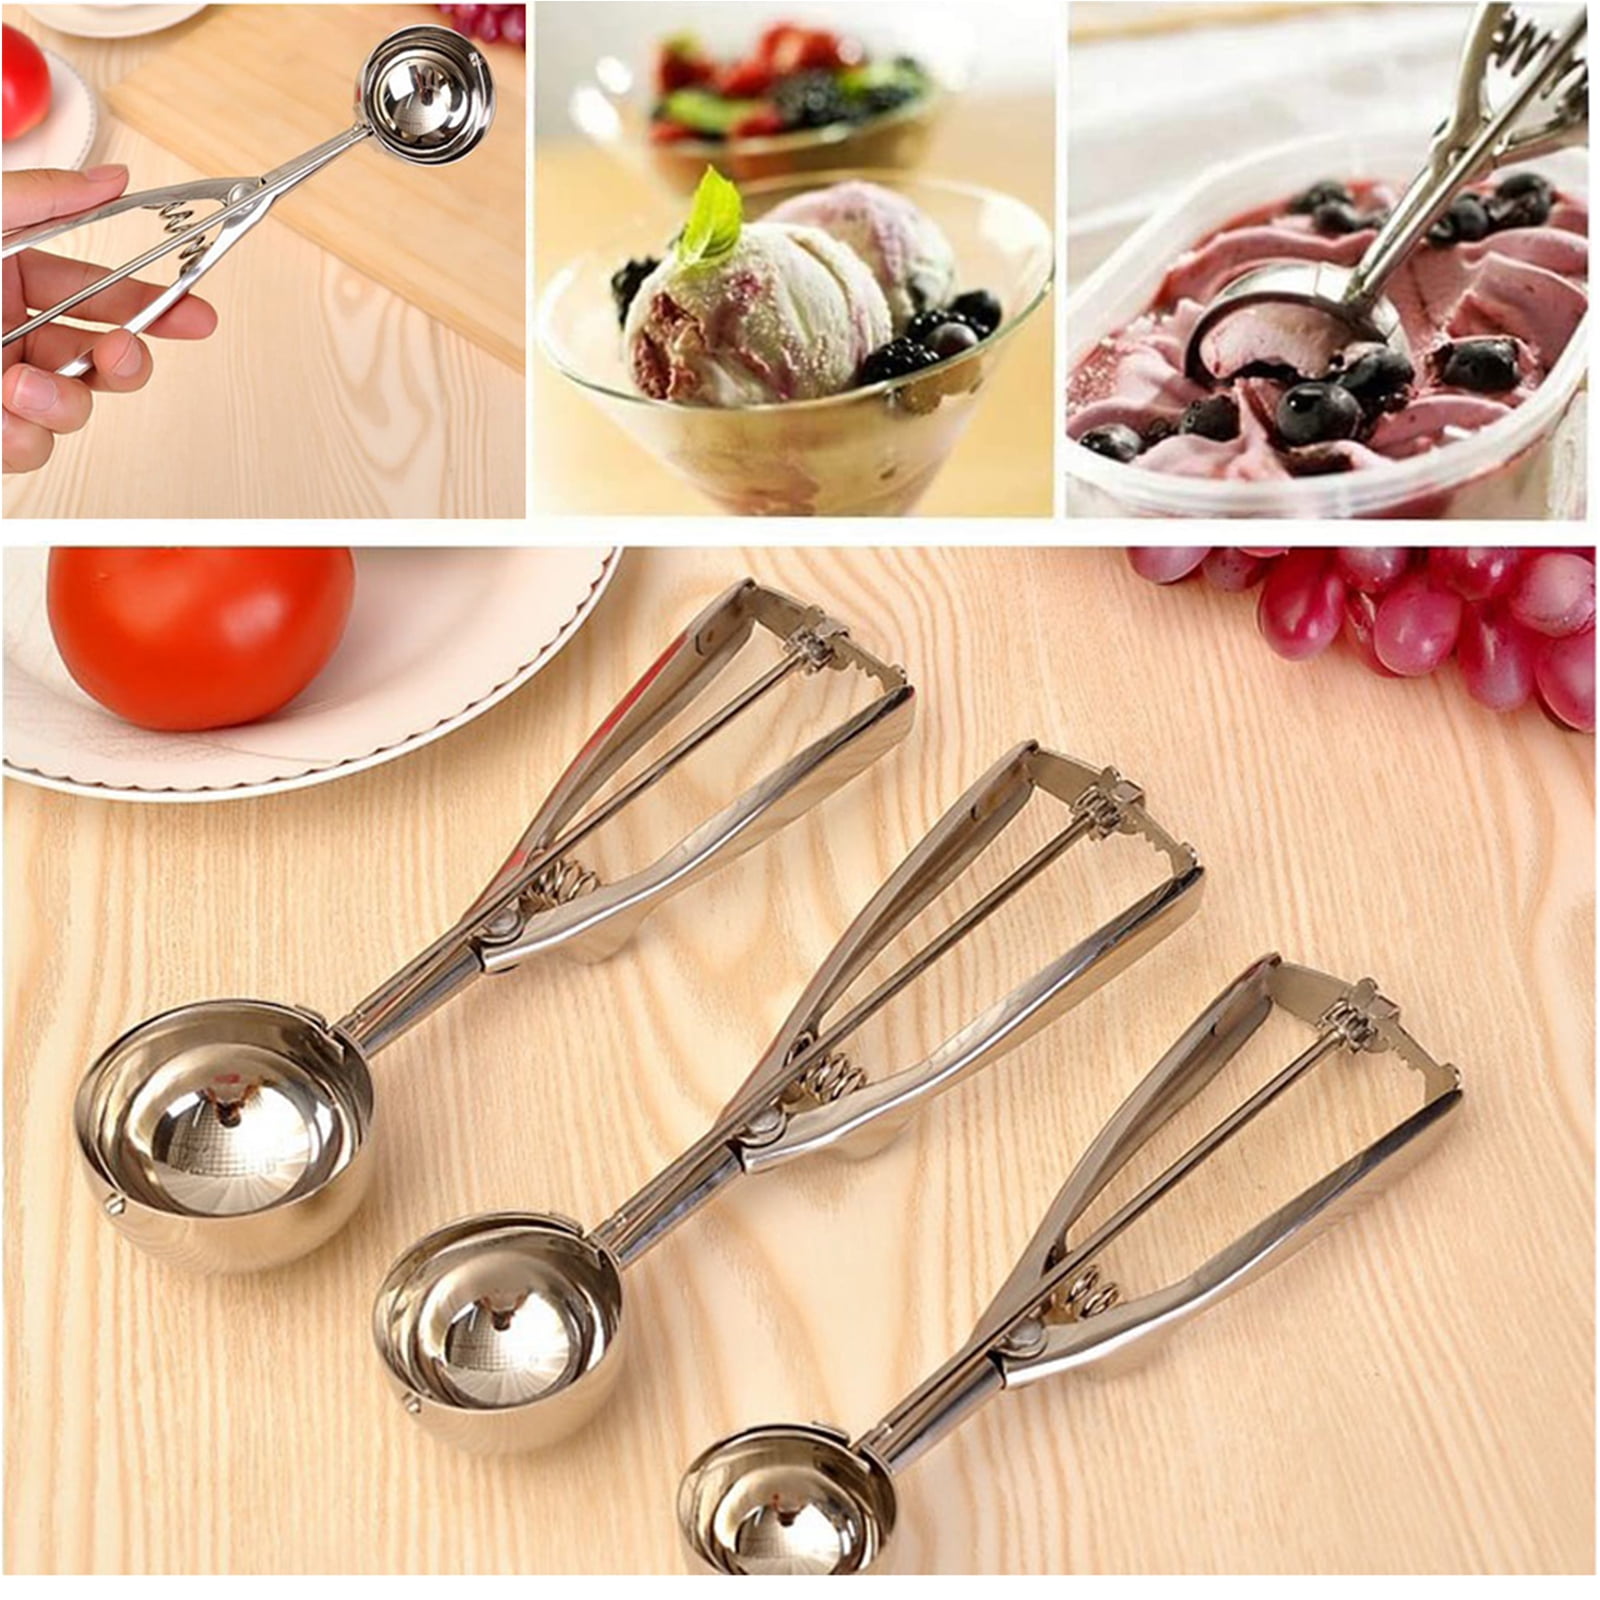 Stainless Steel , Polished, 3 Pieces Different Sizes Small 4cm, Medium 5cm  Large 6cm Ice Cream Spoon With Ejector, R